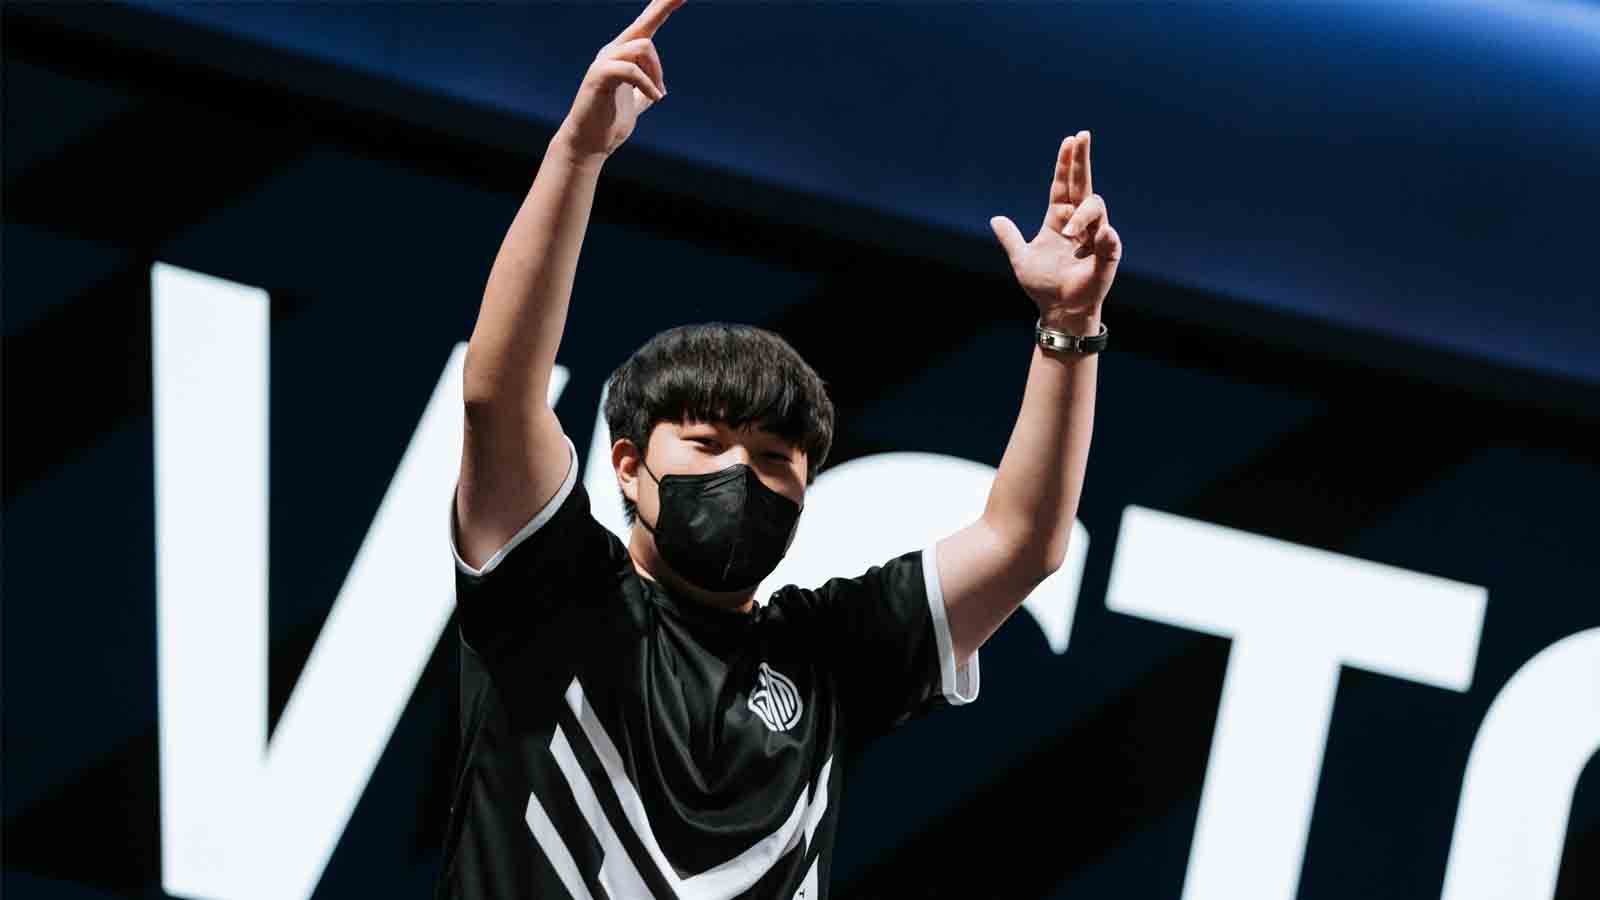 Huni Steps Down From TSM With A Wrist Injury